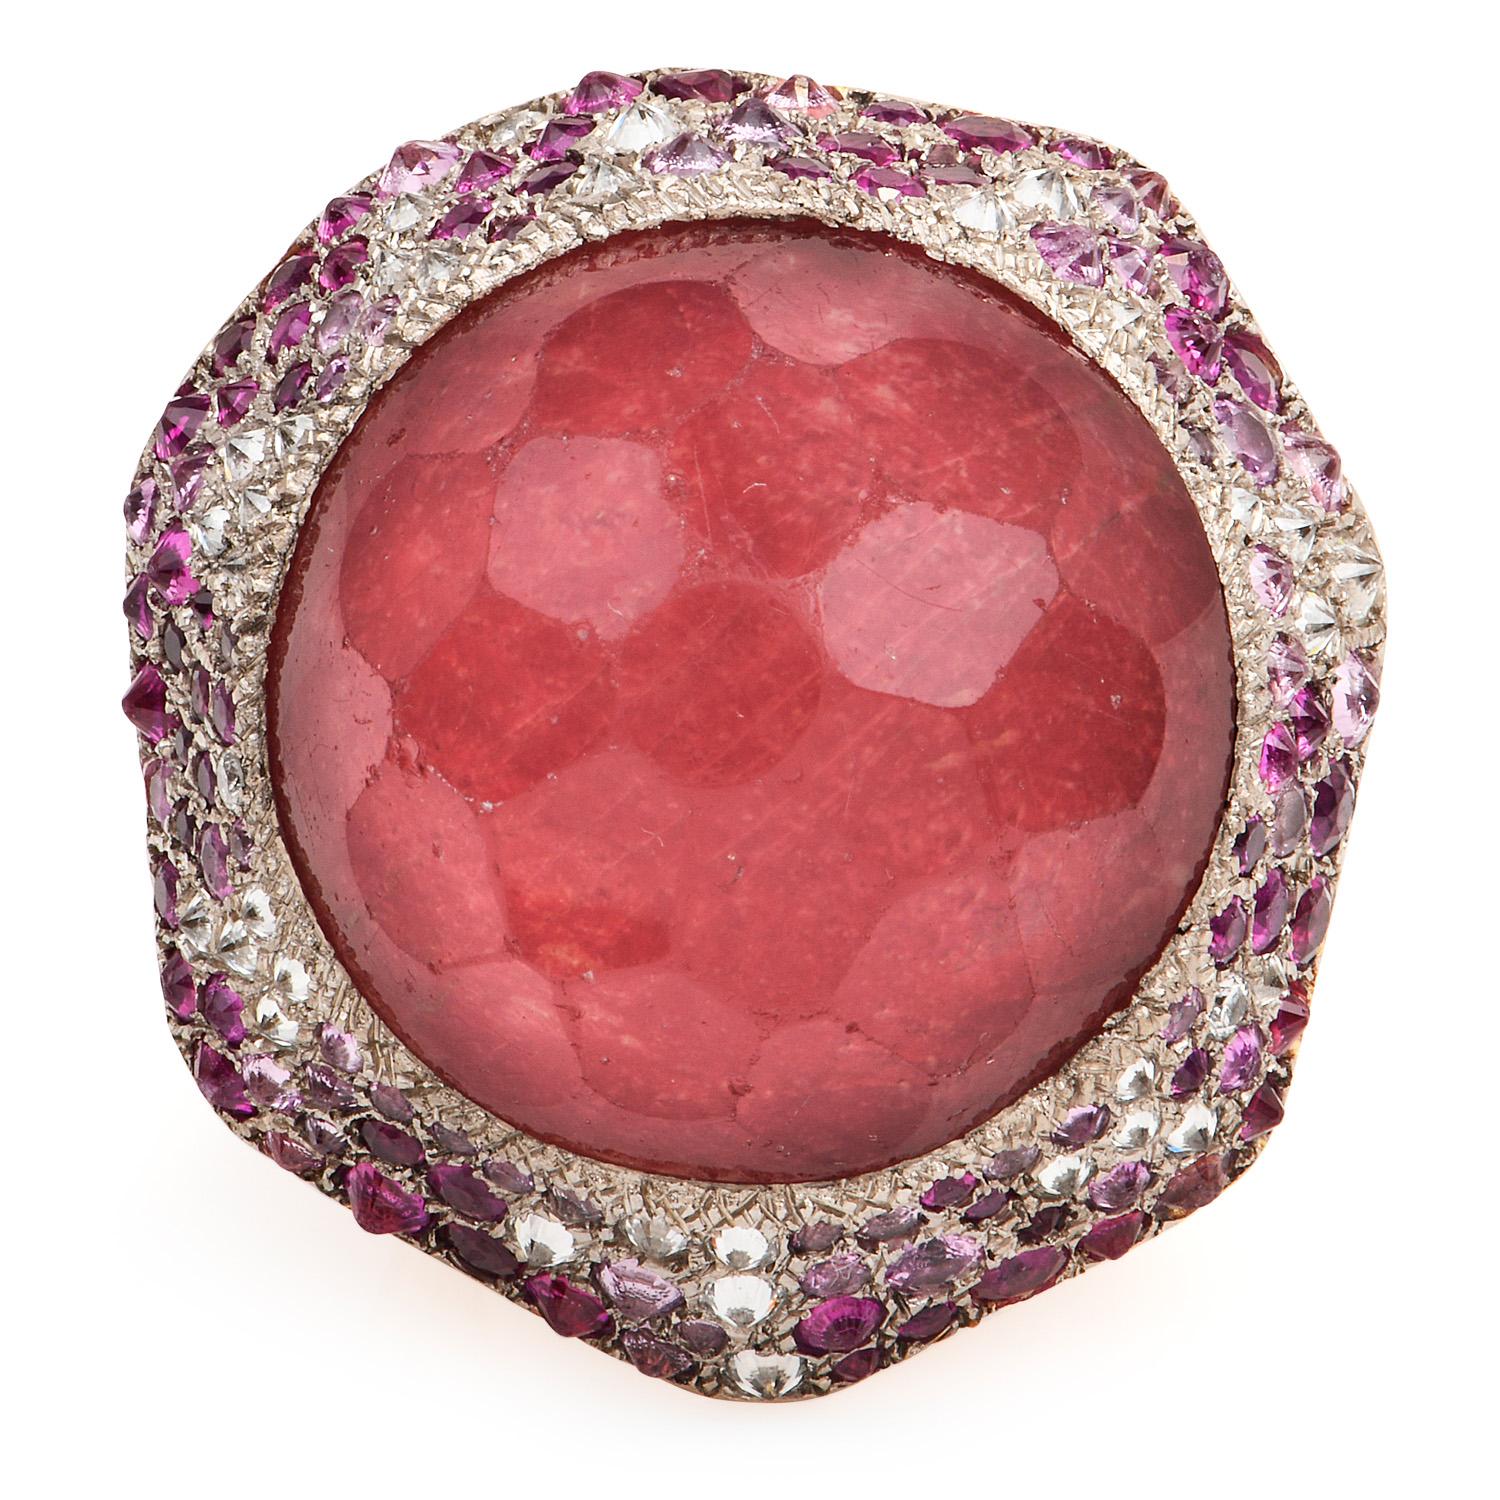 This Vasari, Spanish brand, large cluster design cocktail ring, definitely a Statement, icebreaker piece.

Crafted in solid heavy 18K yellow & white gold, the center is adorned by a pink Tourmaline Weighing approx. 28.20, measuring 25 mm, Bezel